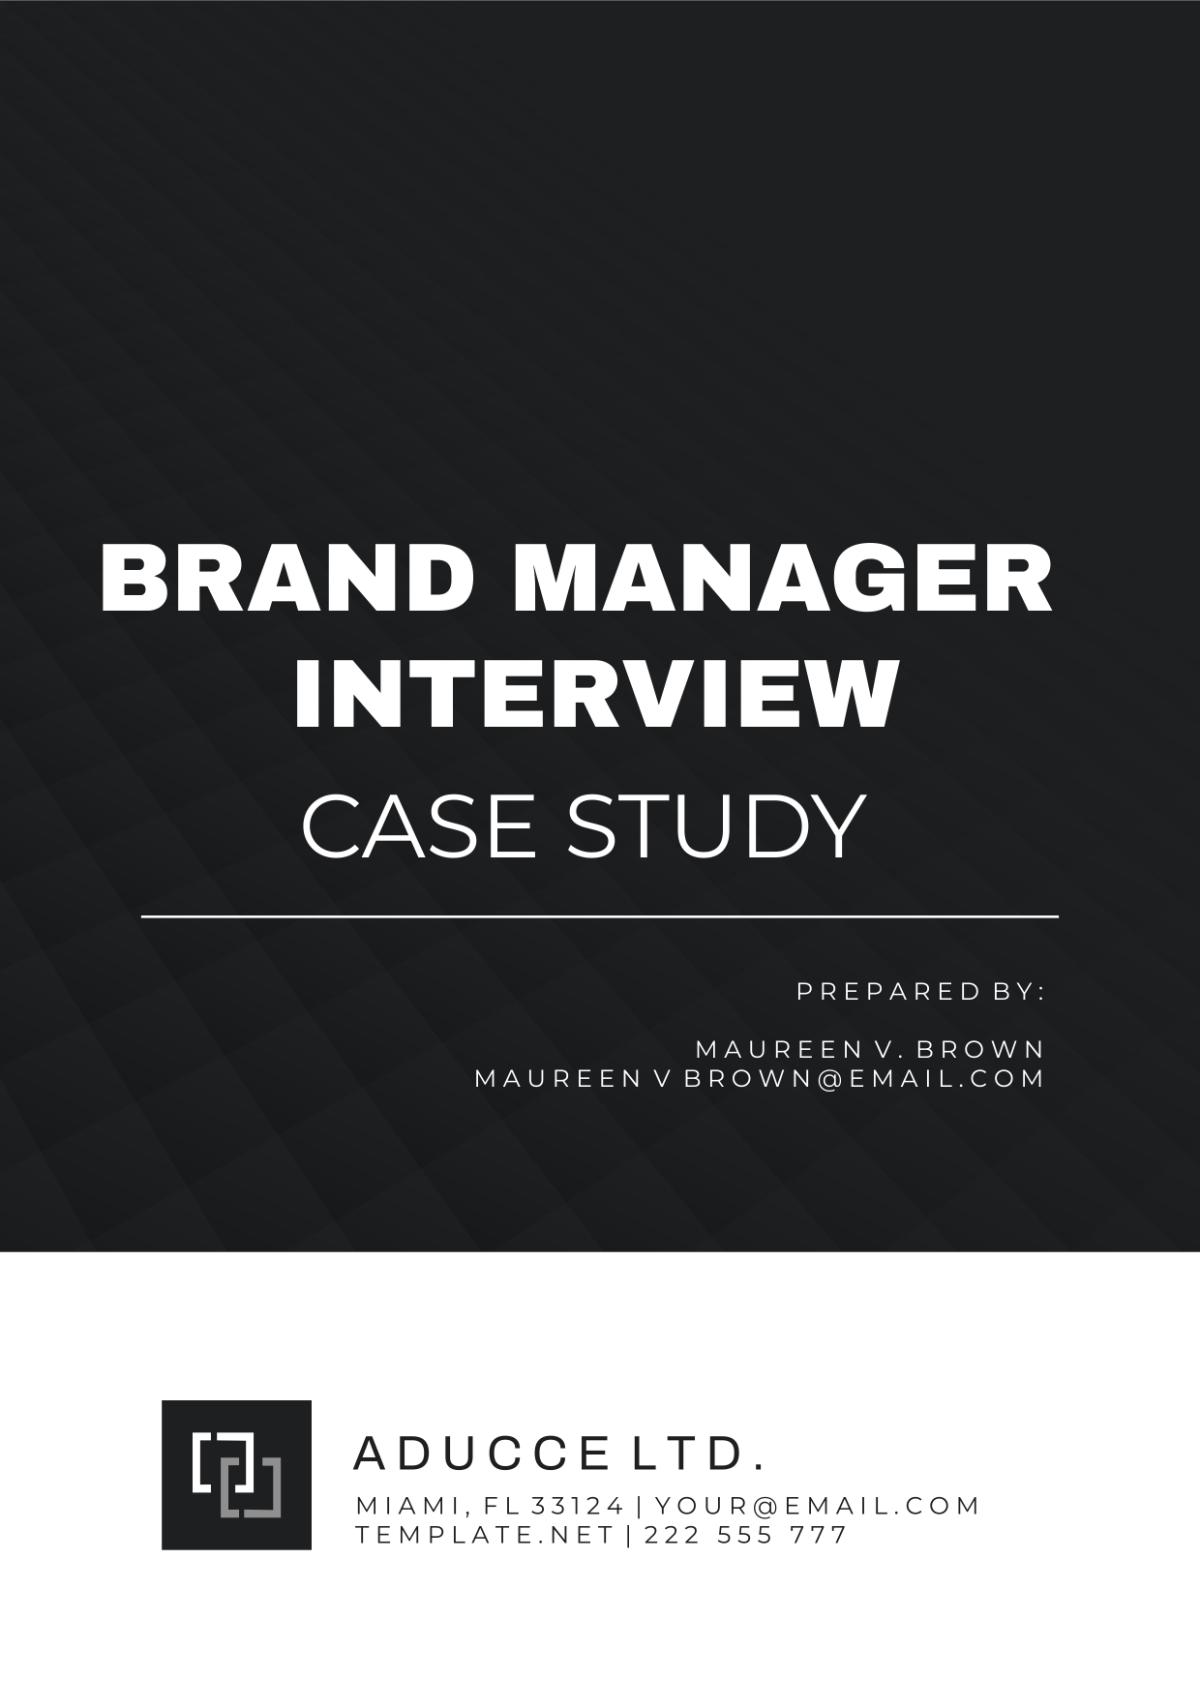 Brand Manager Interview Case Study Template